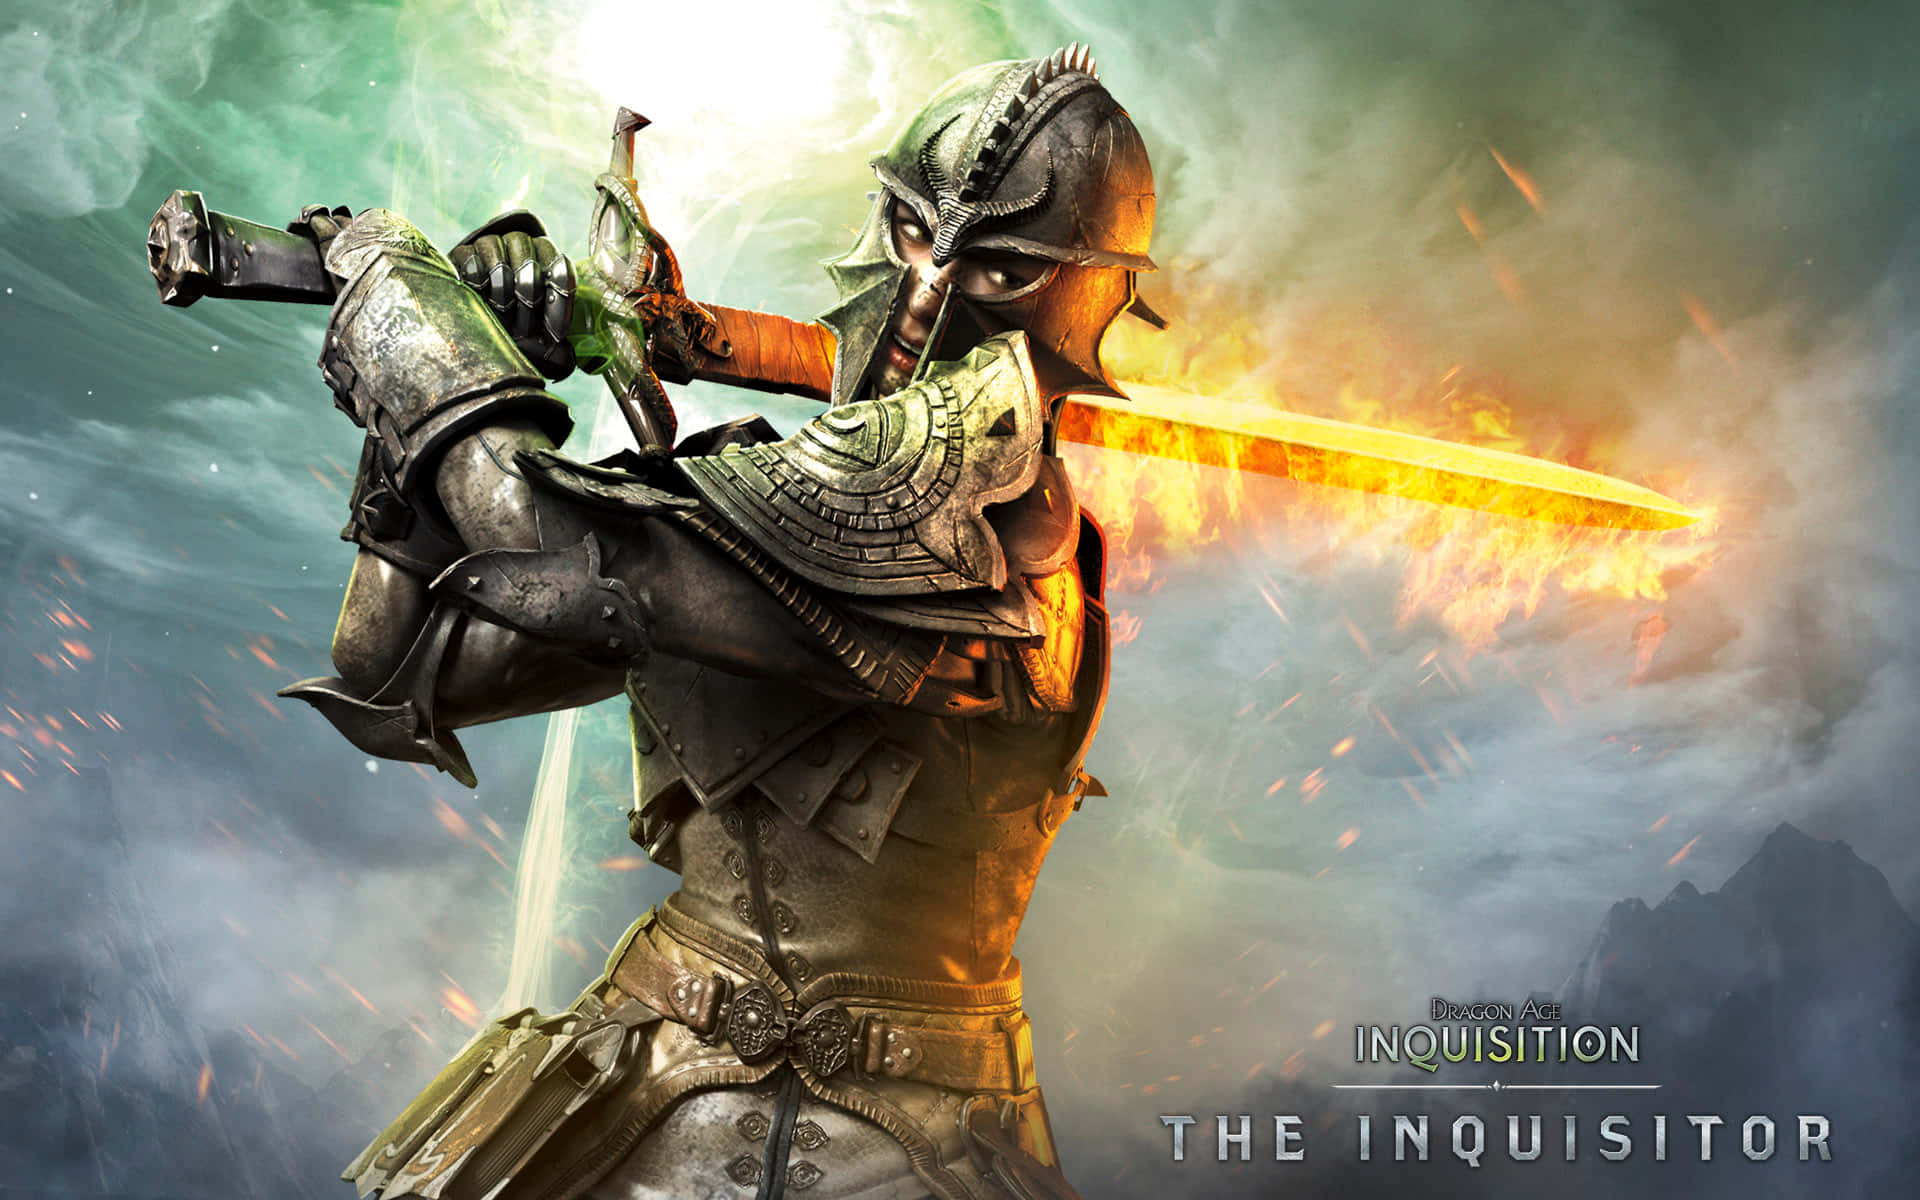 Rally your followers and take up arms in Dragon Age Inquisition!